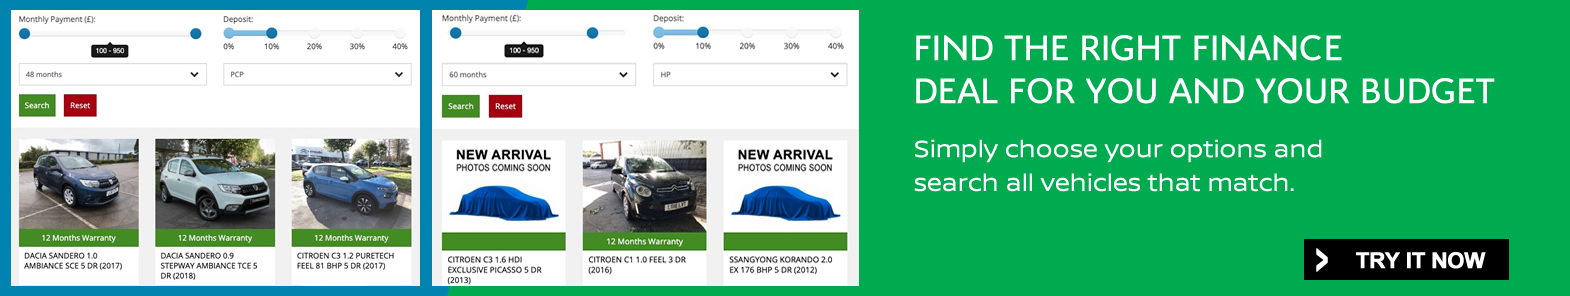 Search for a vehicle based on your finance budget